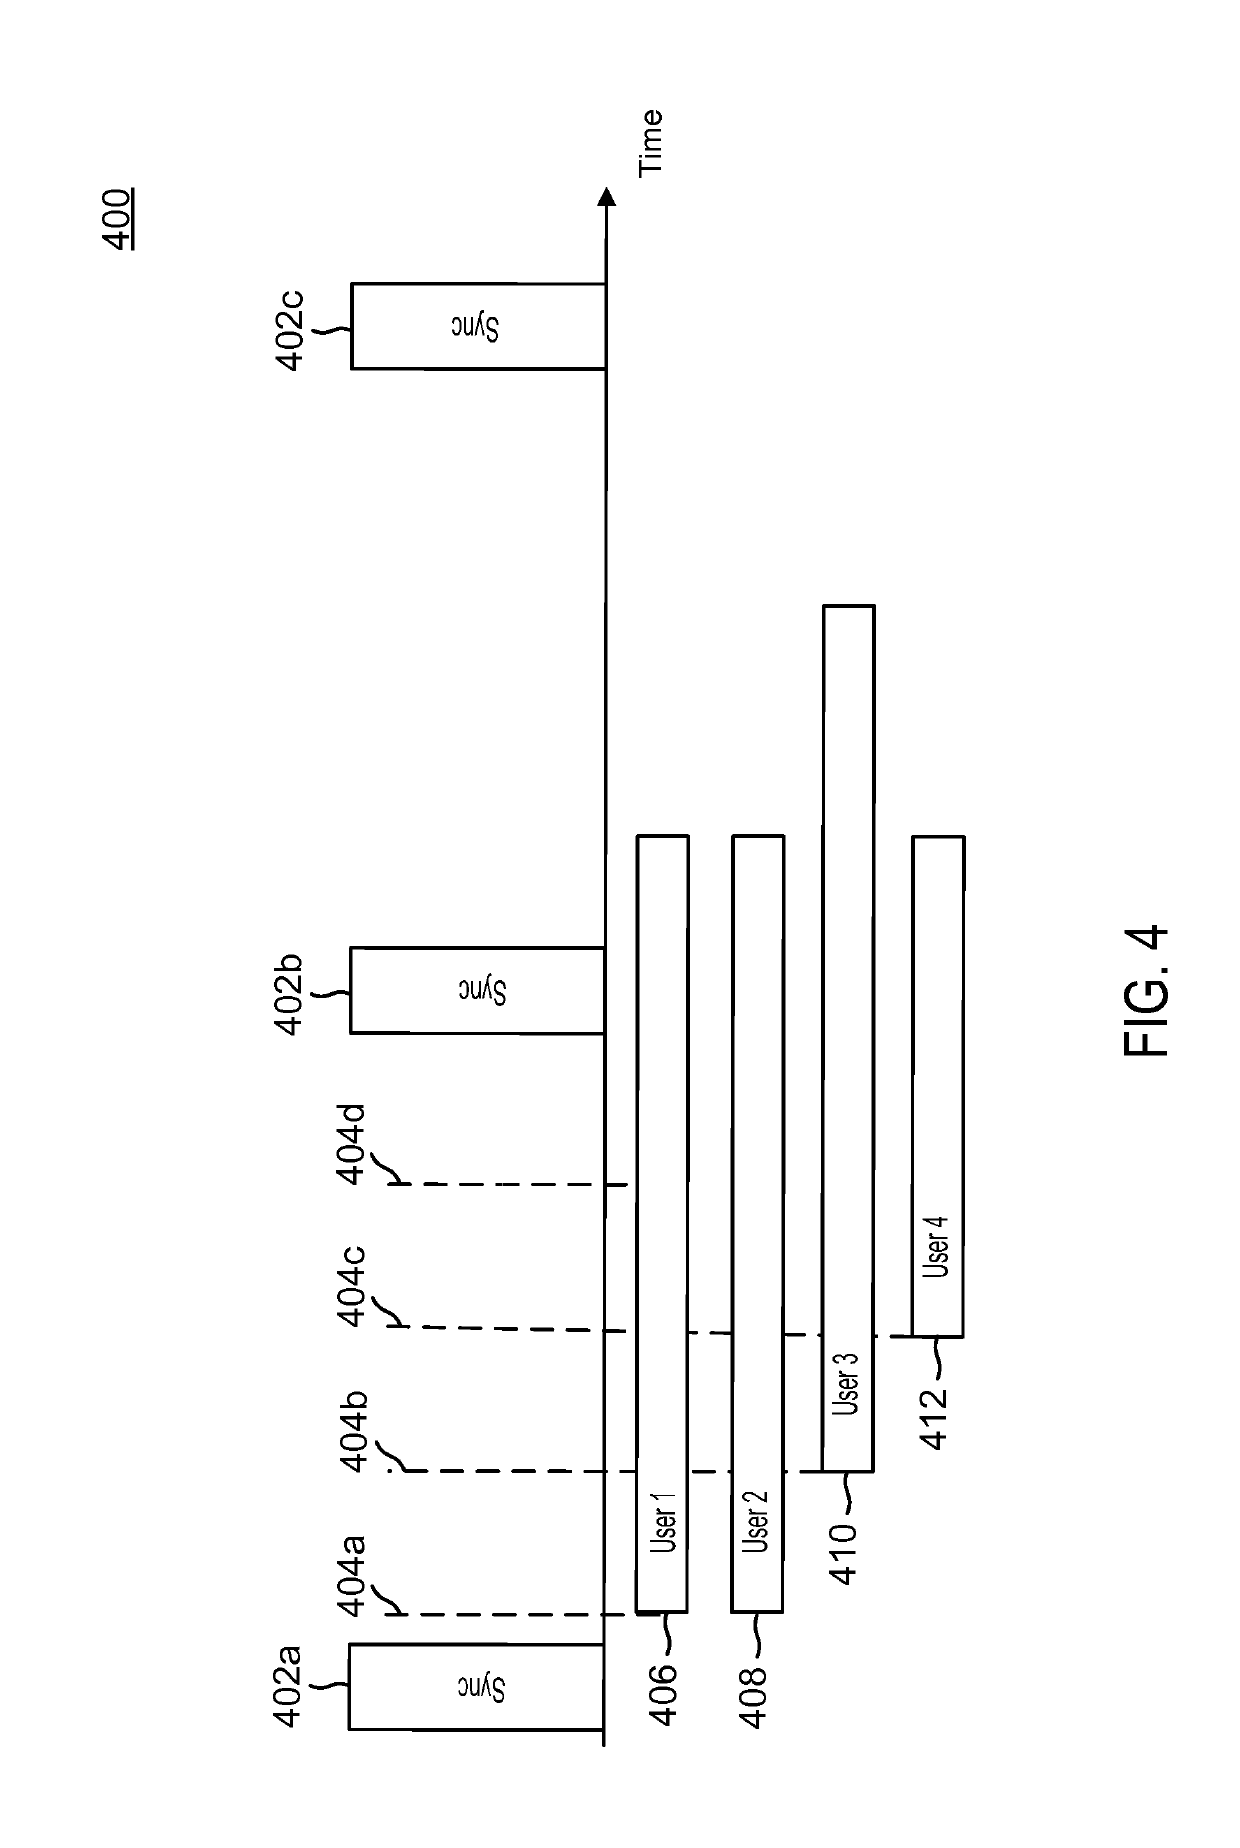 Reserved resource pool assisted access resource selection for small data transmission